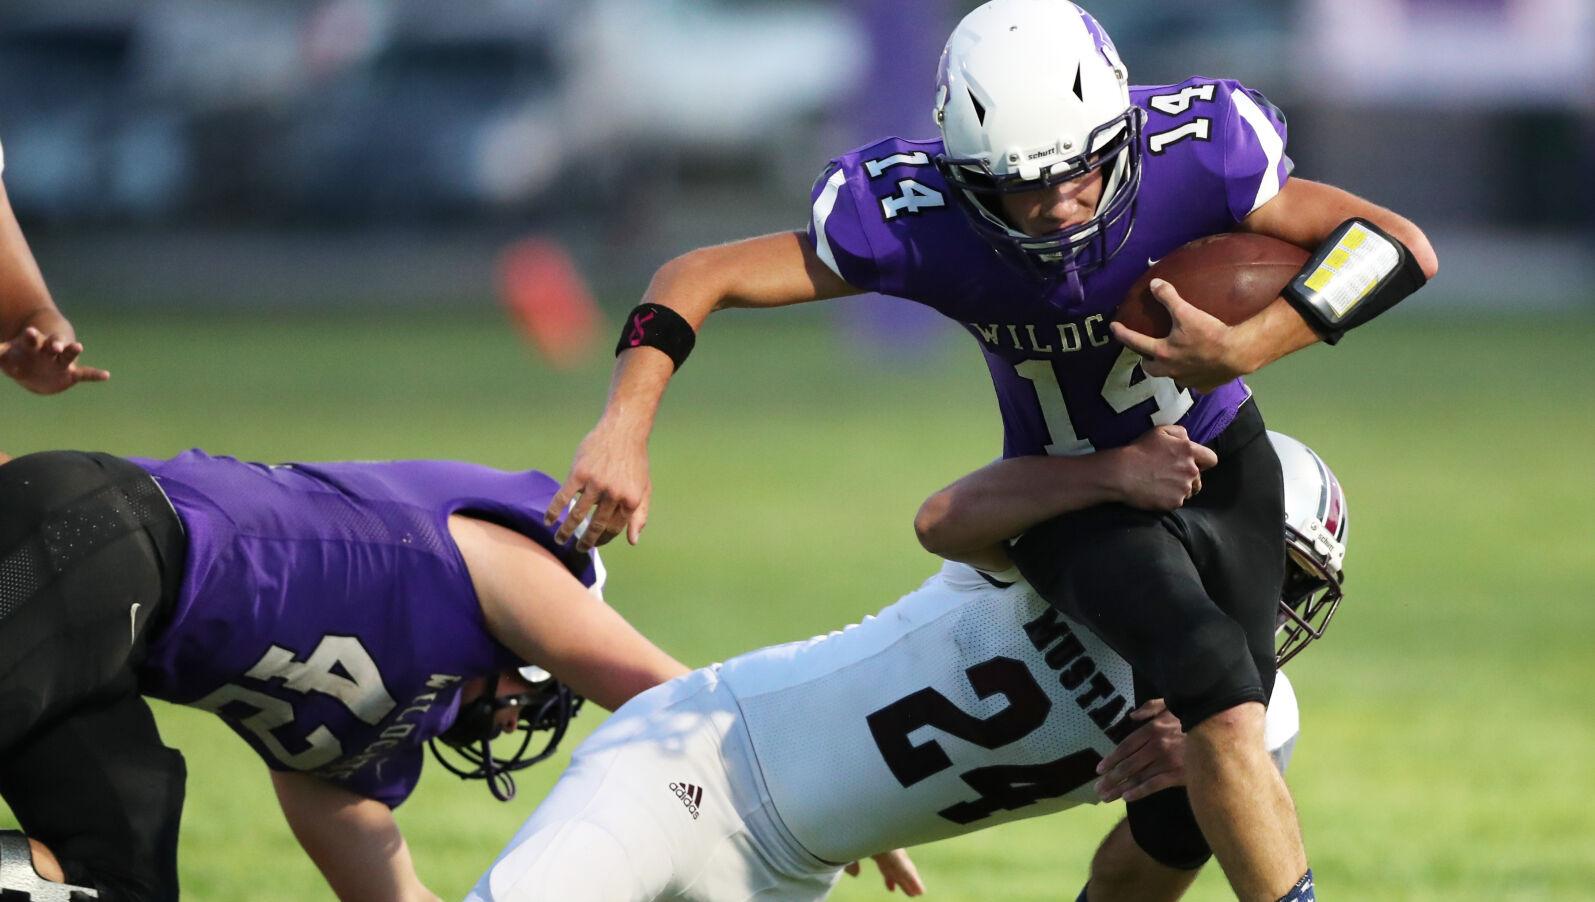 Experience the key word for Axtell's fall sports team